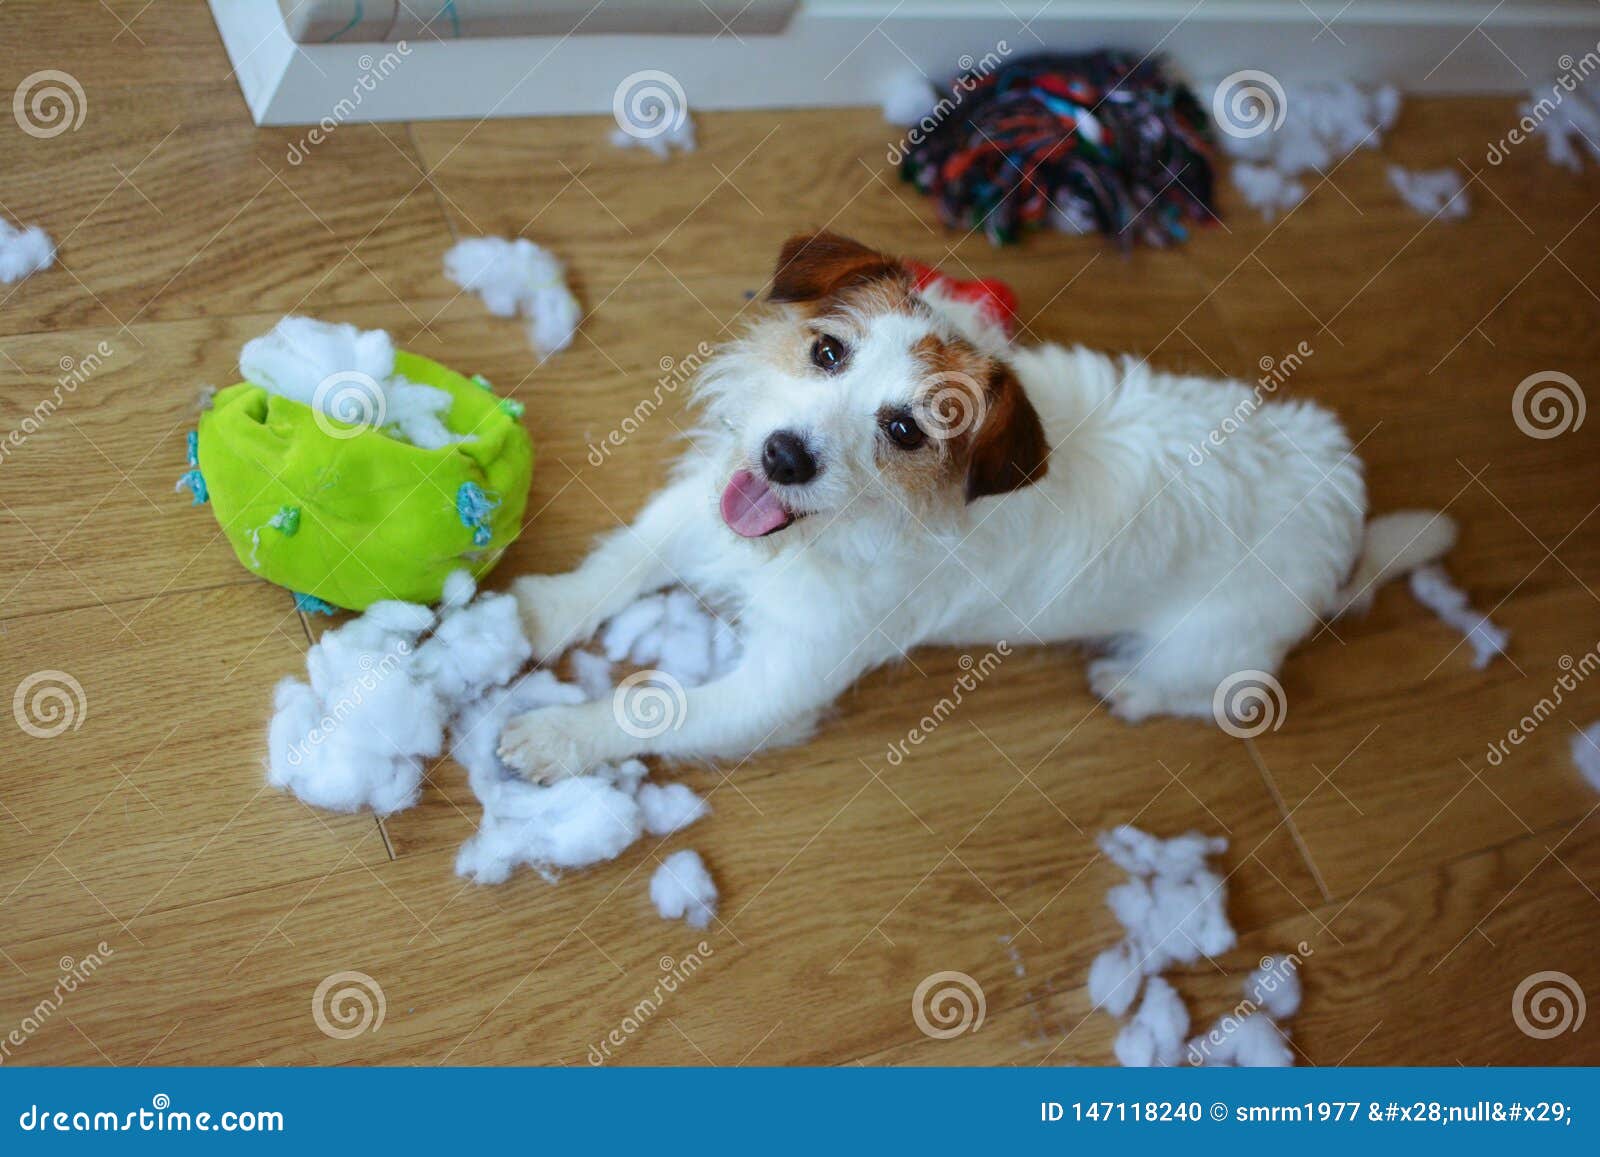 dog mischief. funny and guilty jack russell destroyed a fabric and fluffy ball and toys at home. high angle view